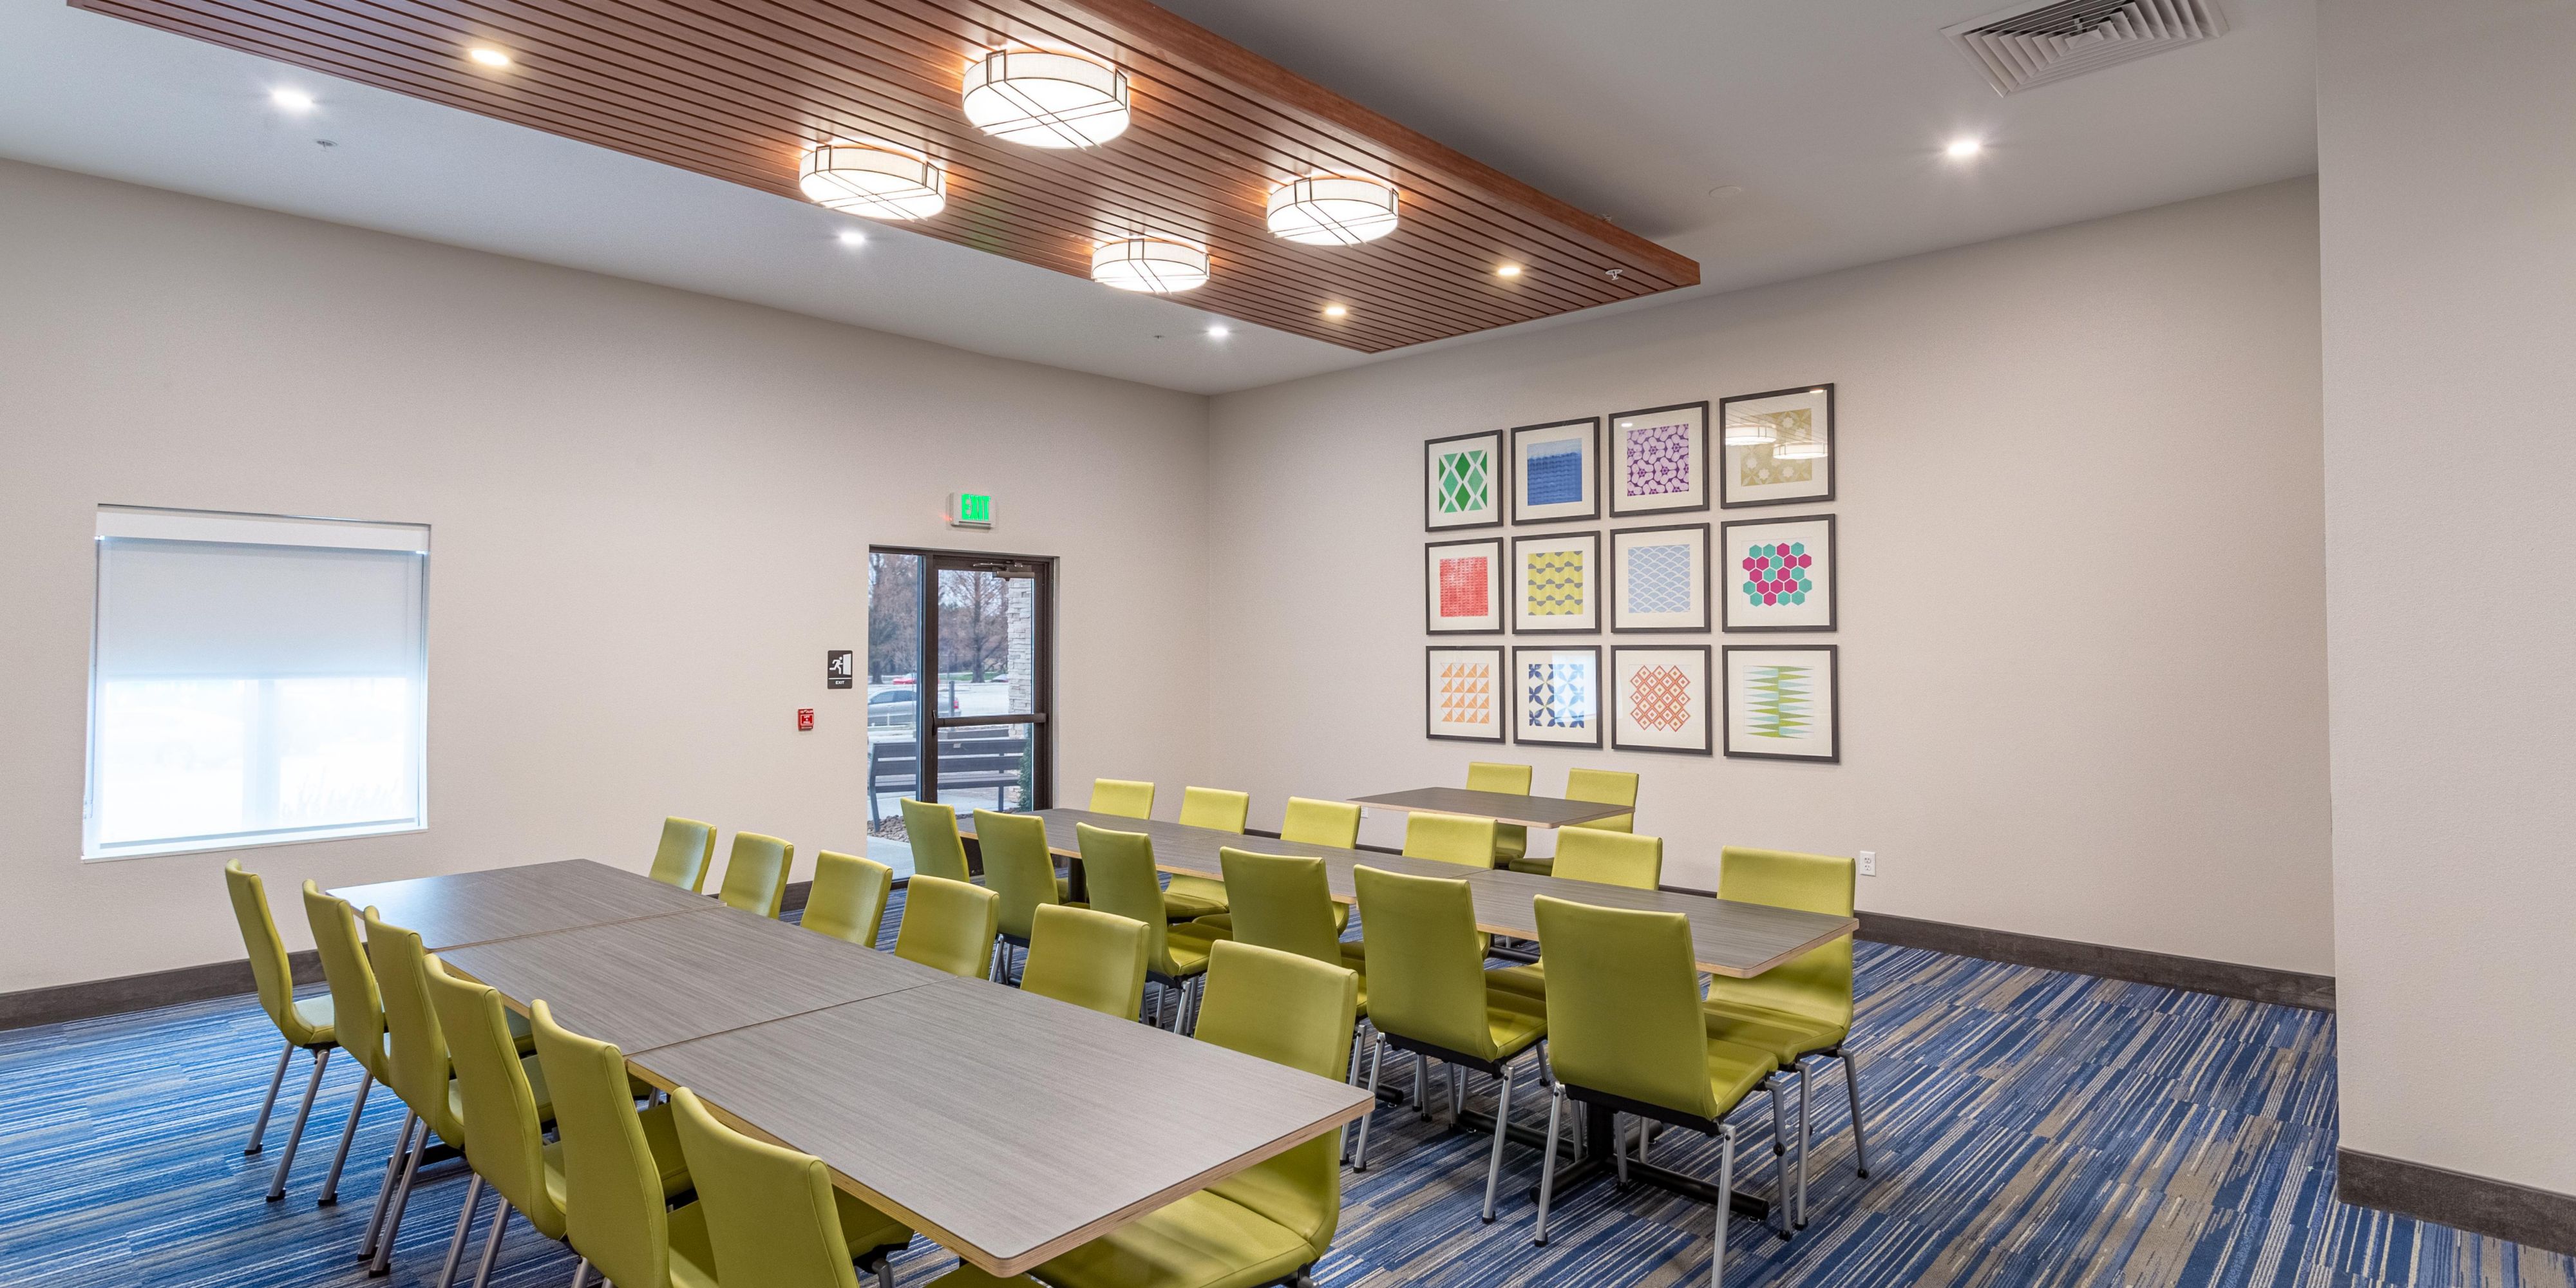 Our beautiful 800 square foot meeting room is an ideal space for informal gatherings with family and friends as things get back to 'normal'. Whether you are coming to the hotel for a Family Reunion, Wedding, Graduation, Birthday Celebration or a travel team game our space might be a good fit for you. Contact the sales office for more details. 